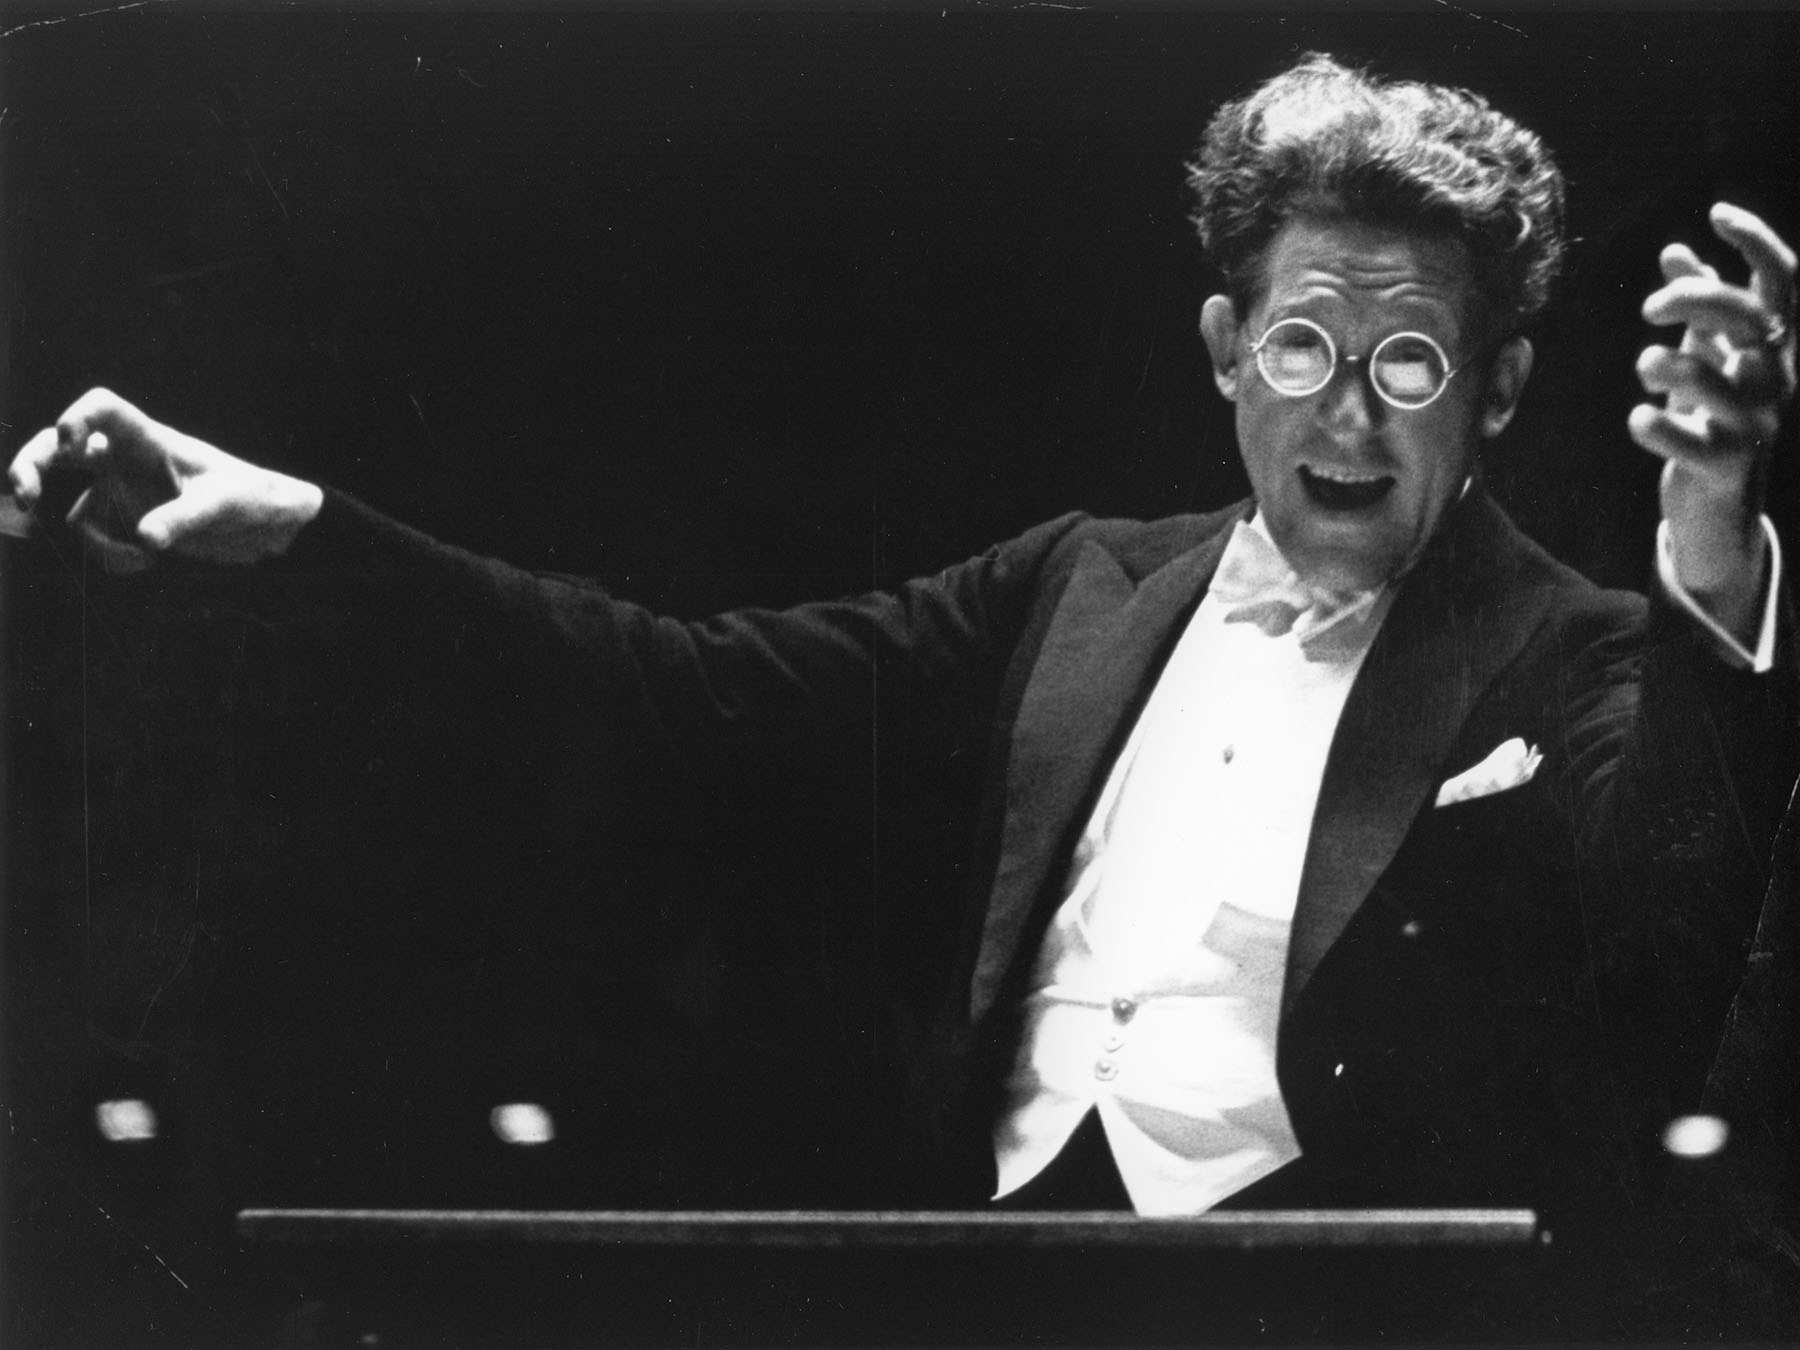 Artur Rodzinski conducting the Orchestra. He is facing the viewer, has a huge, excited smile on his face, and is wearing large glasses. 